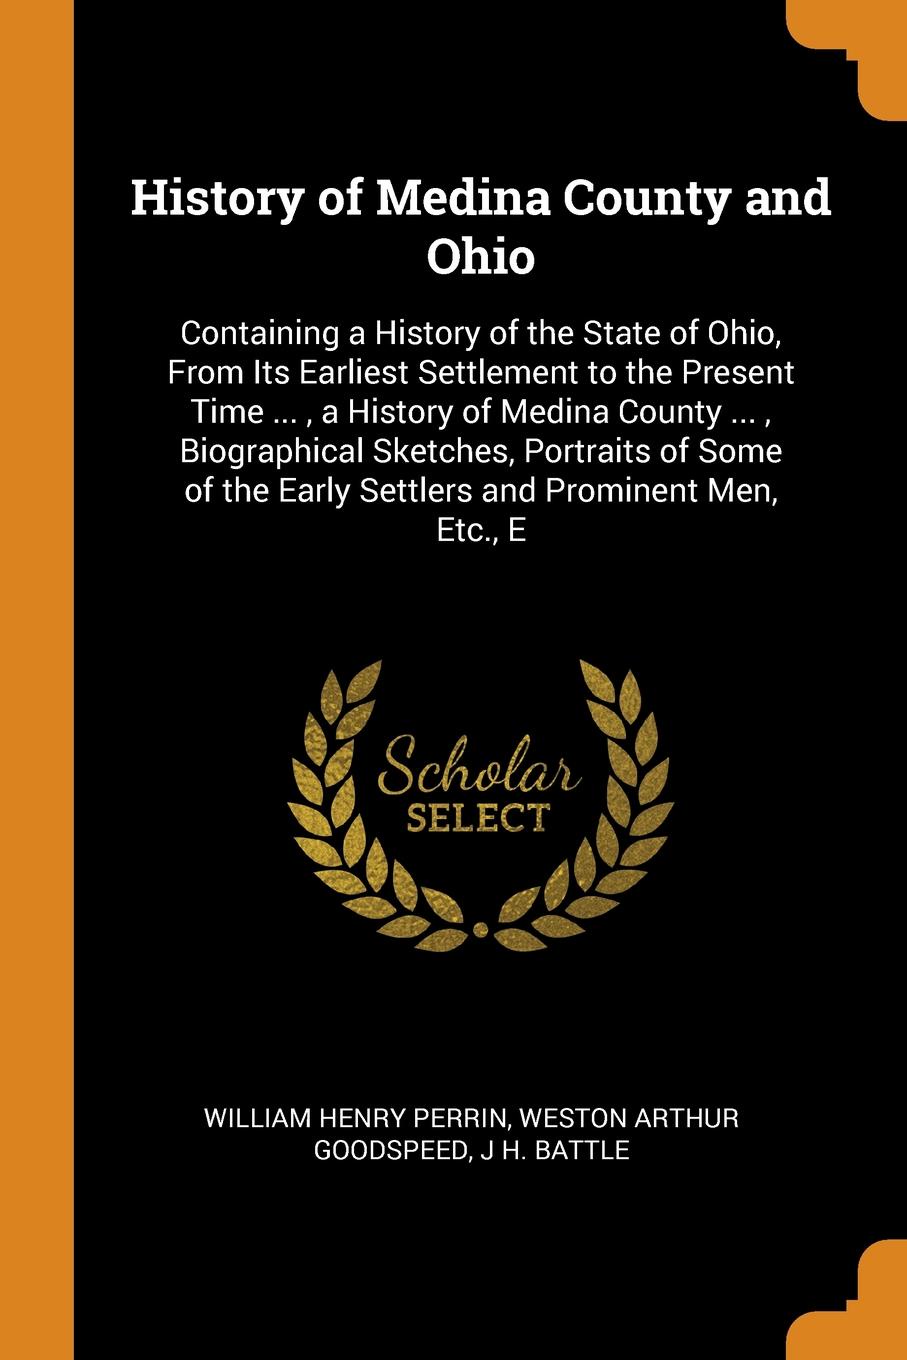 History of Medina County and Ohio. Containing a History of the State of Ohio, From Its Earliest Settlement to the Present Time ... , a History of Medina County ... , Biographical Sketches, Portraits of Some of the Early Settlers and Prominent Men,...